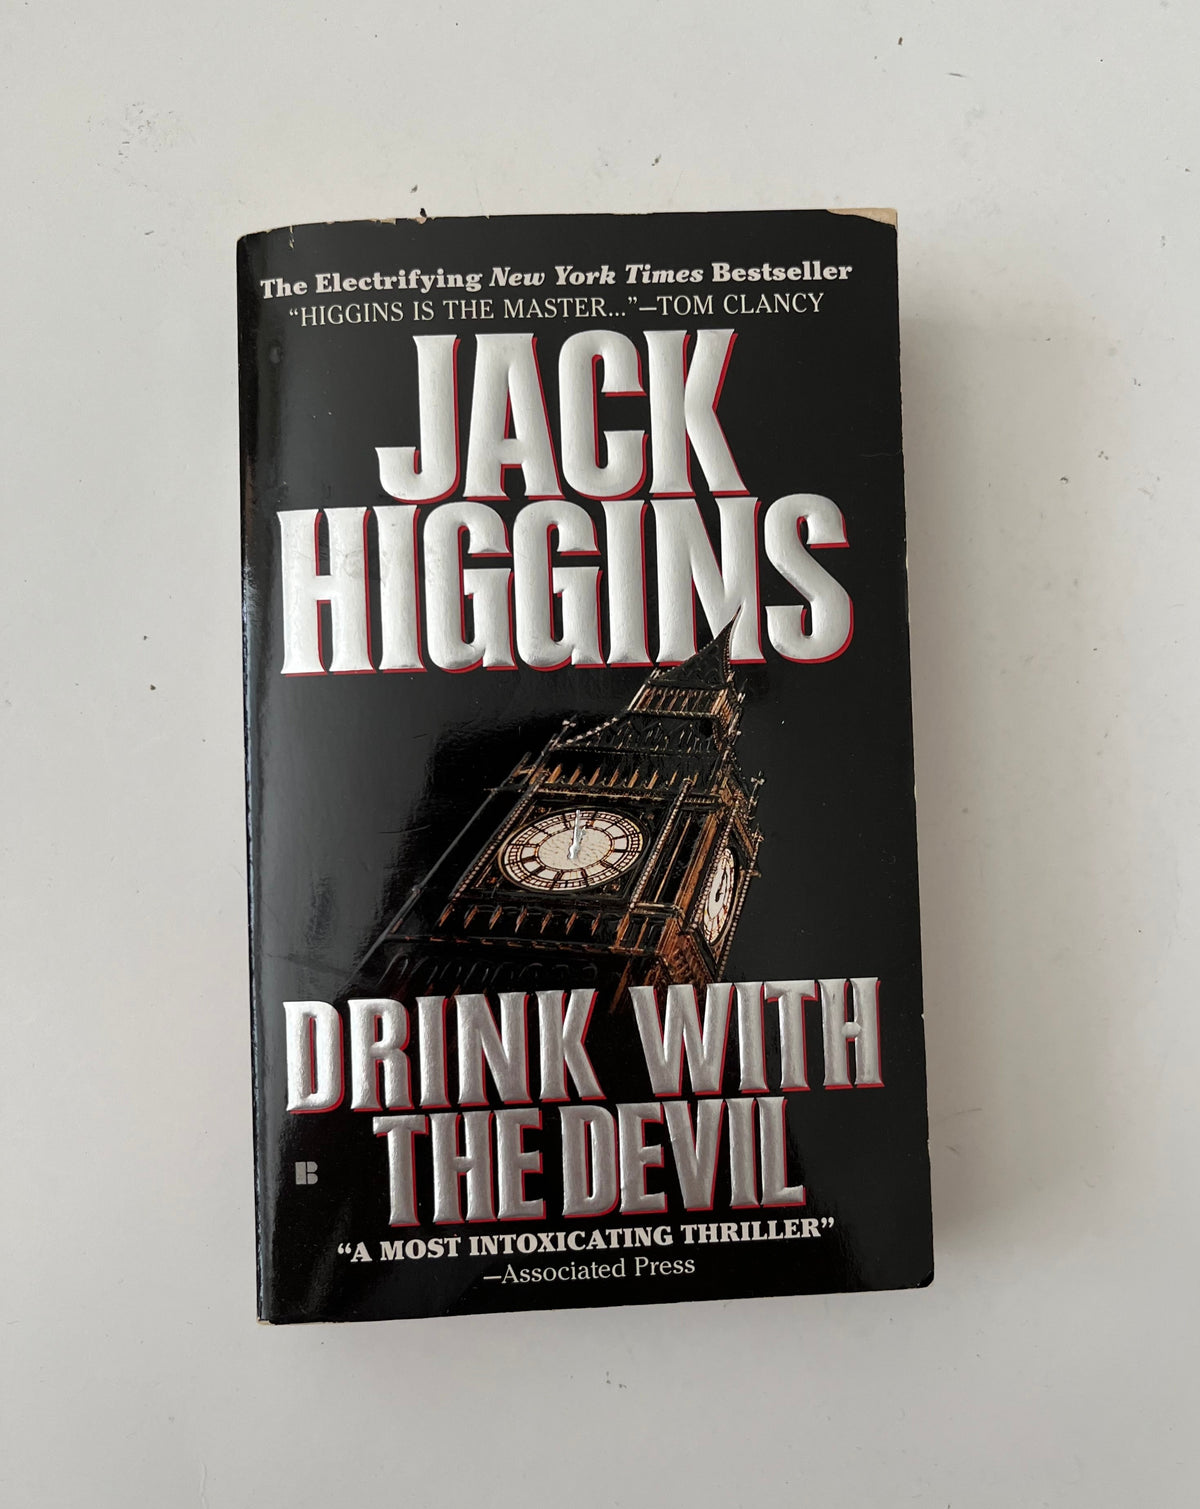 DONATE: Drink with the Devil by Jack Higgins